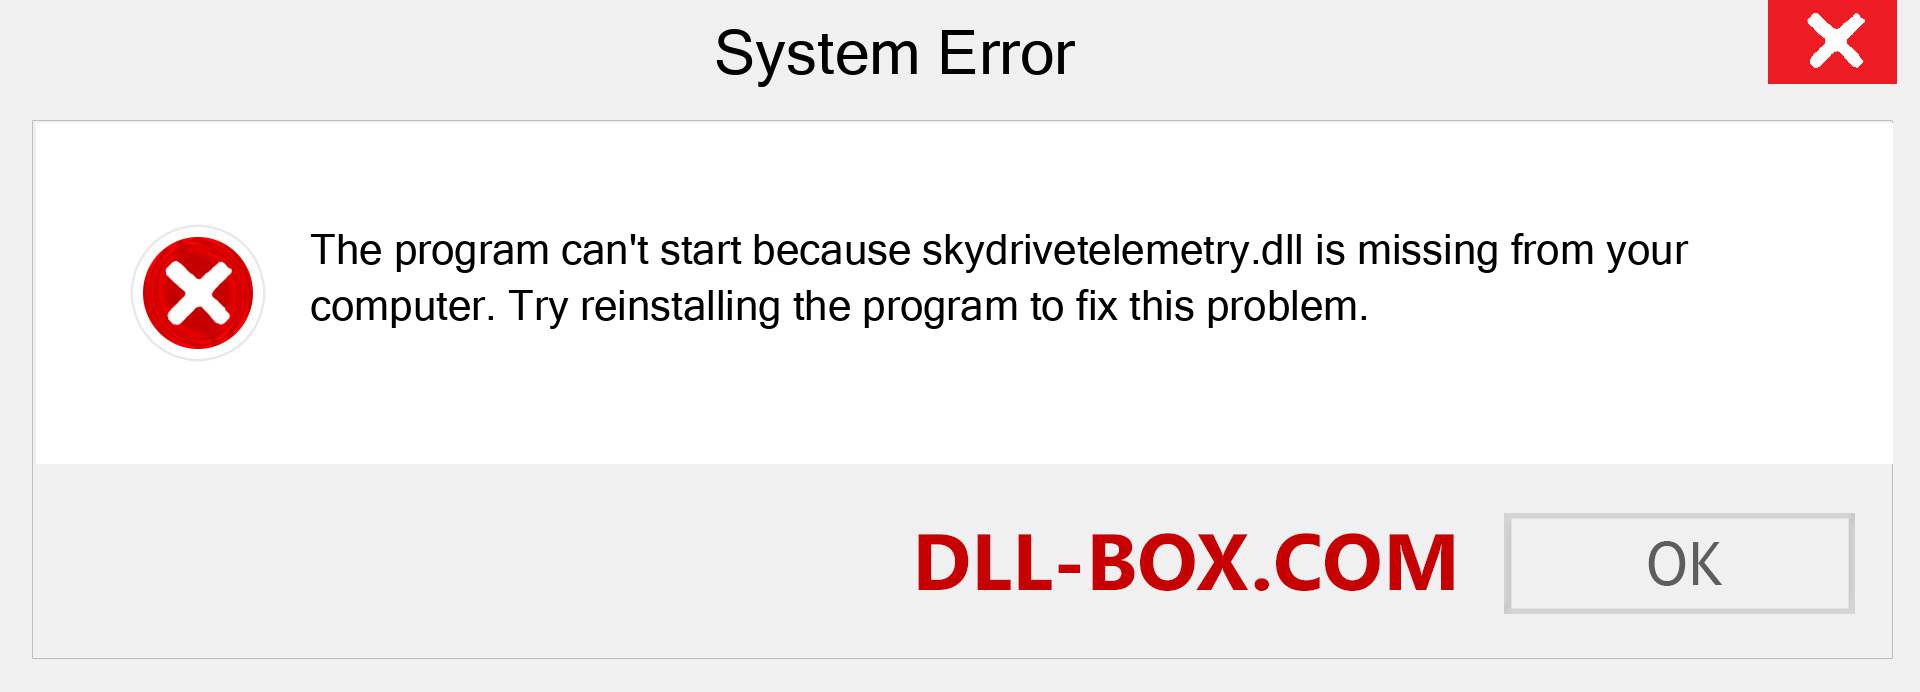  skydrivetelemetry.dll file is missing?. Download for Windows 7, 8, 10 - Fix  skydrivetelemetry dll Missing Error on Windows, photos, images